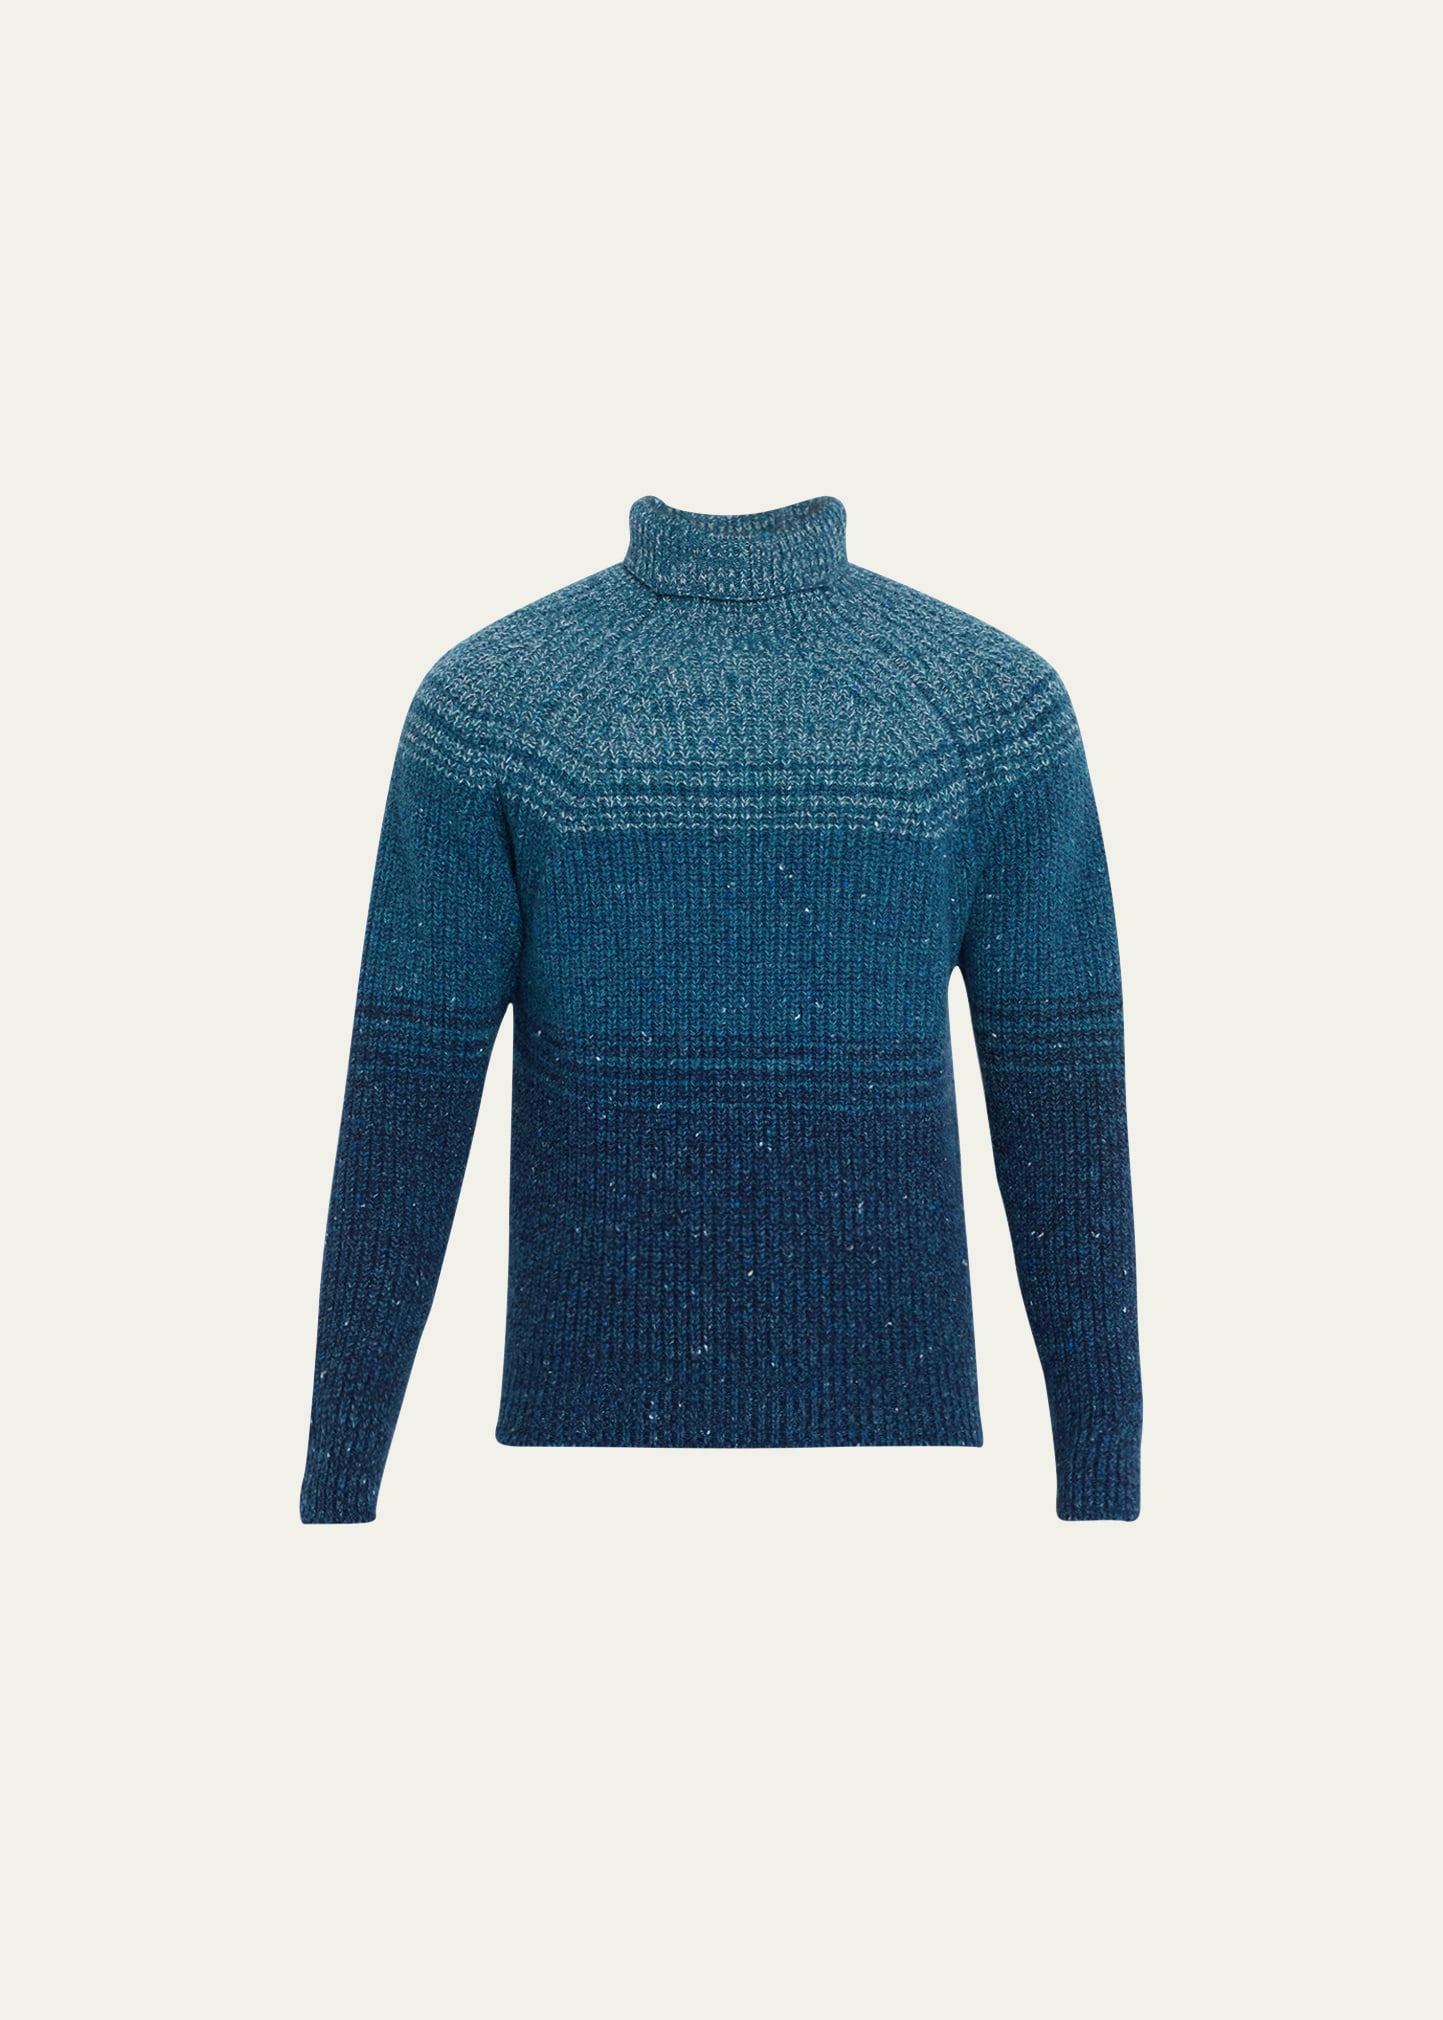 Inis Meain Boatbuilder Ribbed Merino-blend Roll-neck Sweater In 33 Ocean Blue Mix